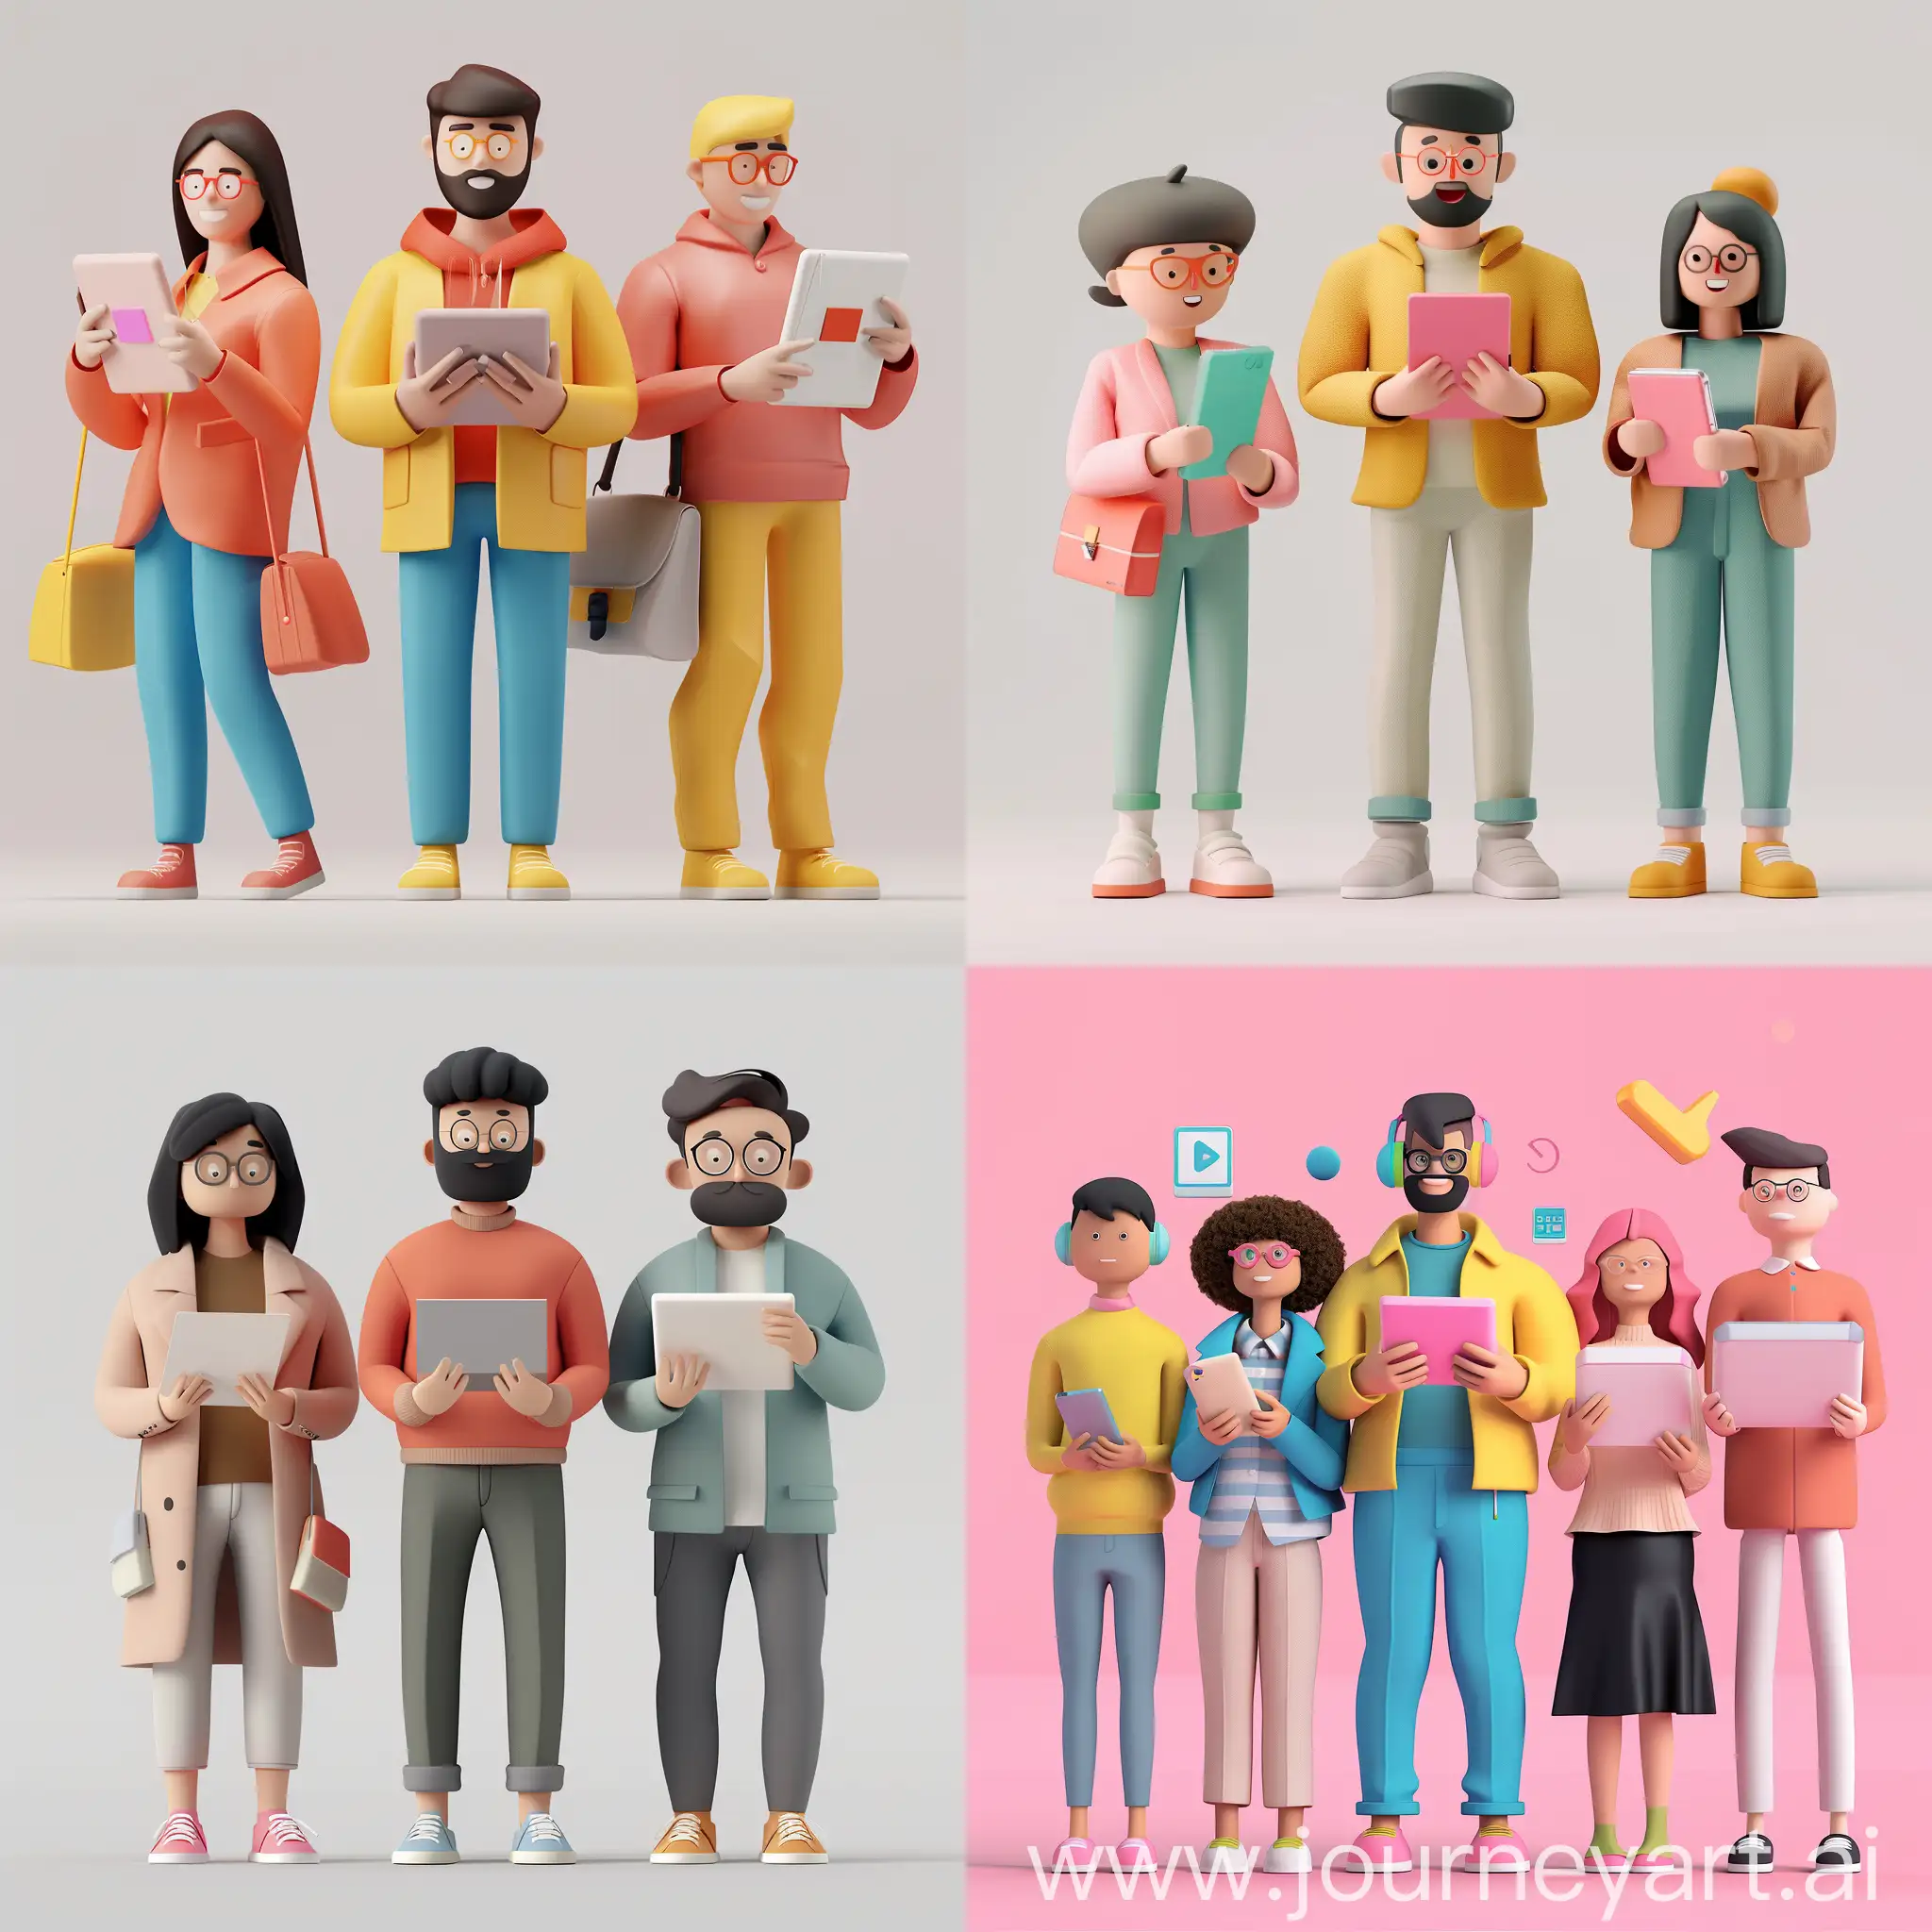 3d illustration of people using digital devices